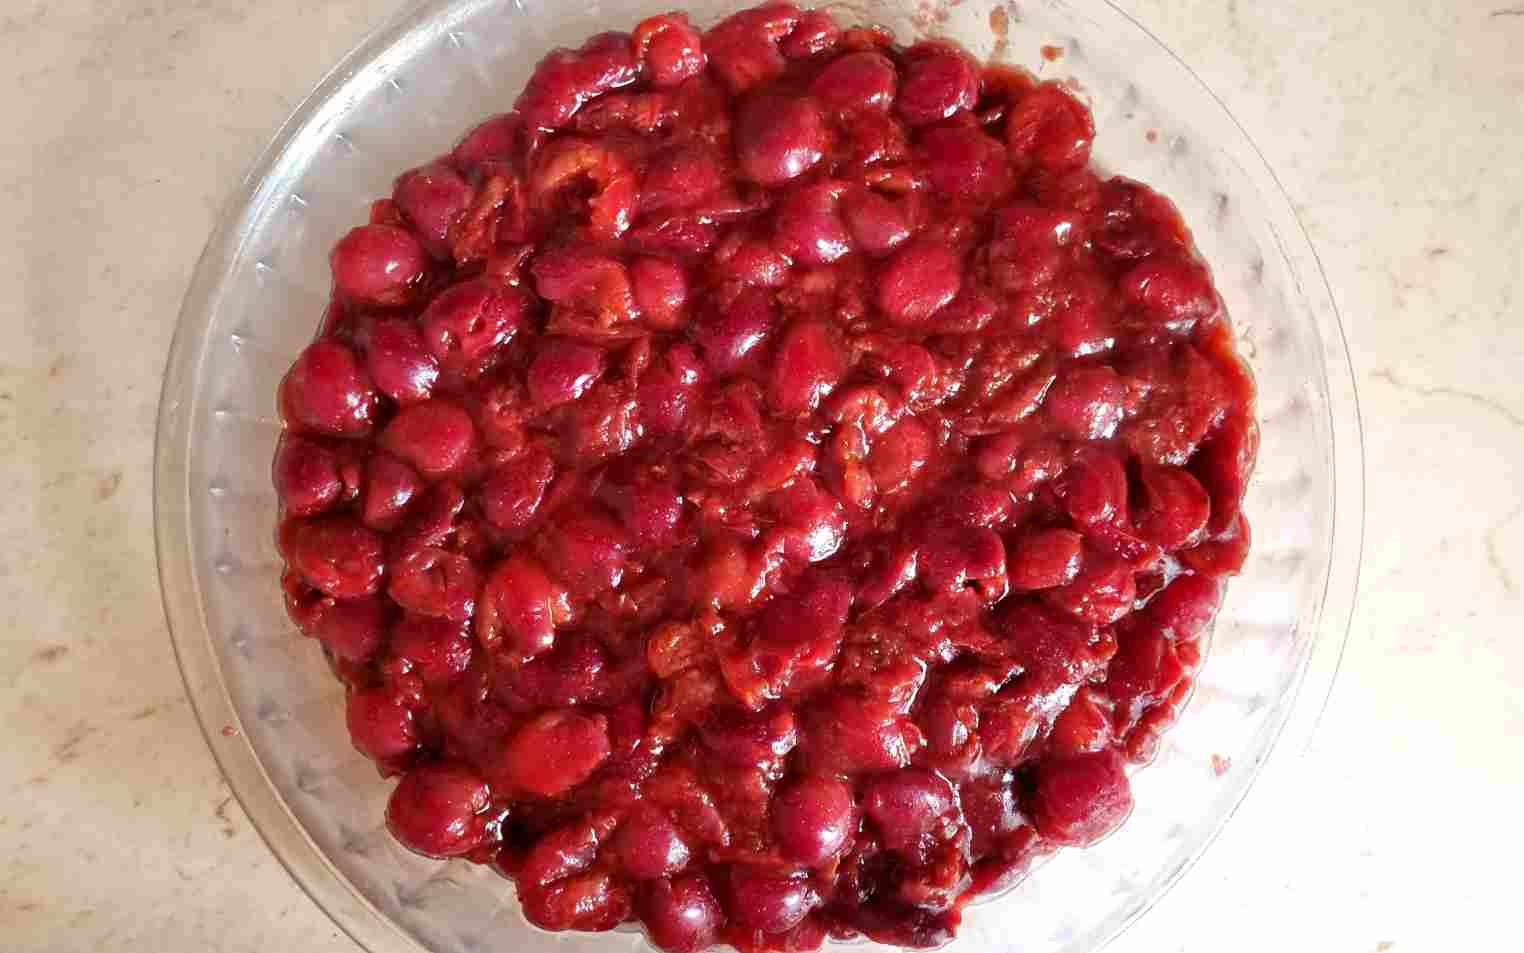 assembling the cherry crumble